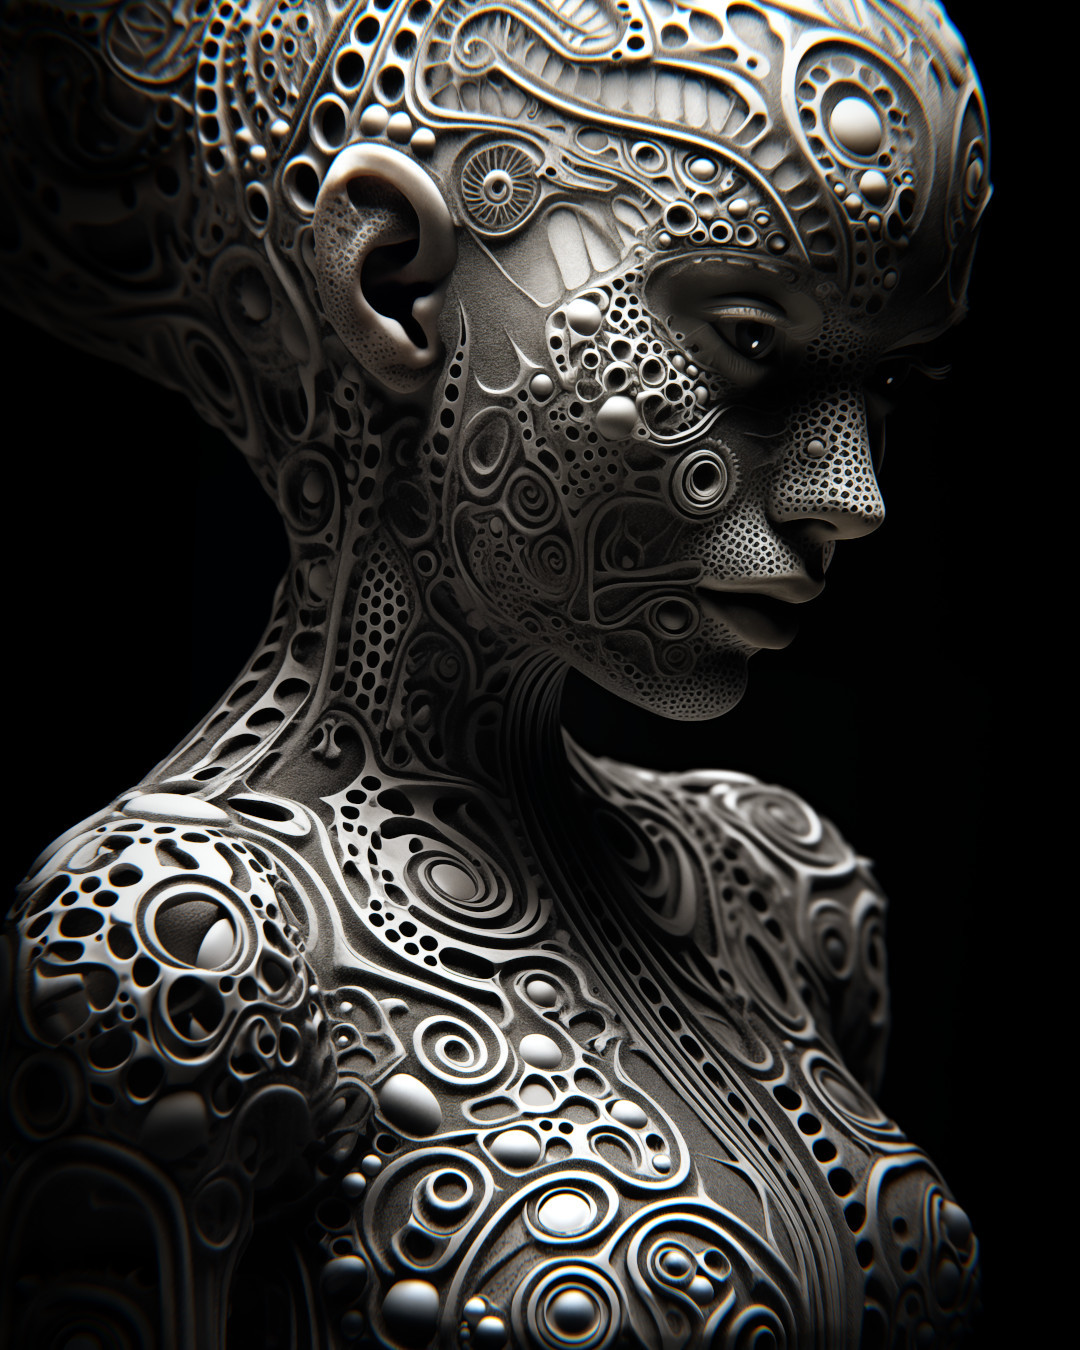 Futuristic engraved body, intricate patterns, dark and light silver